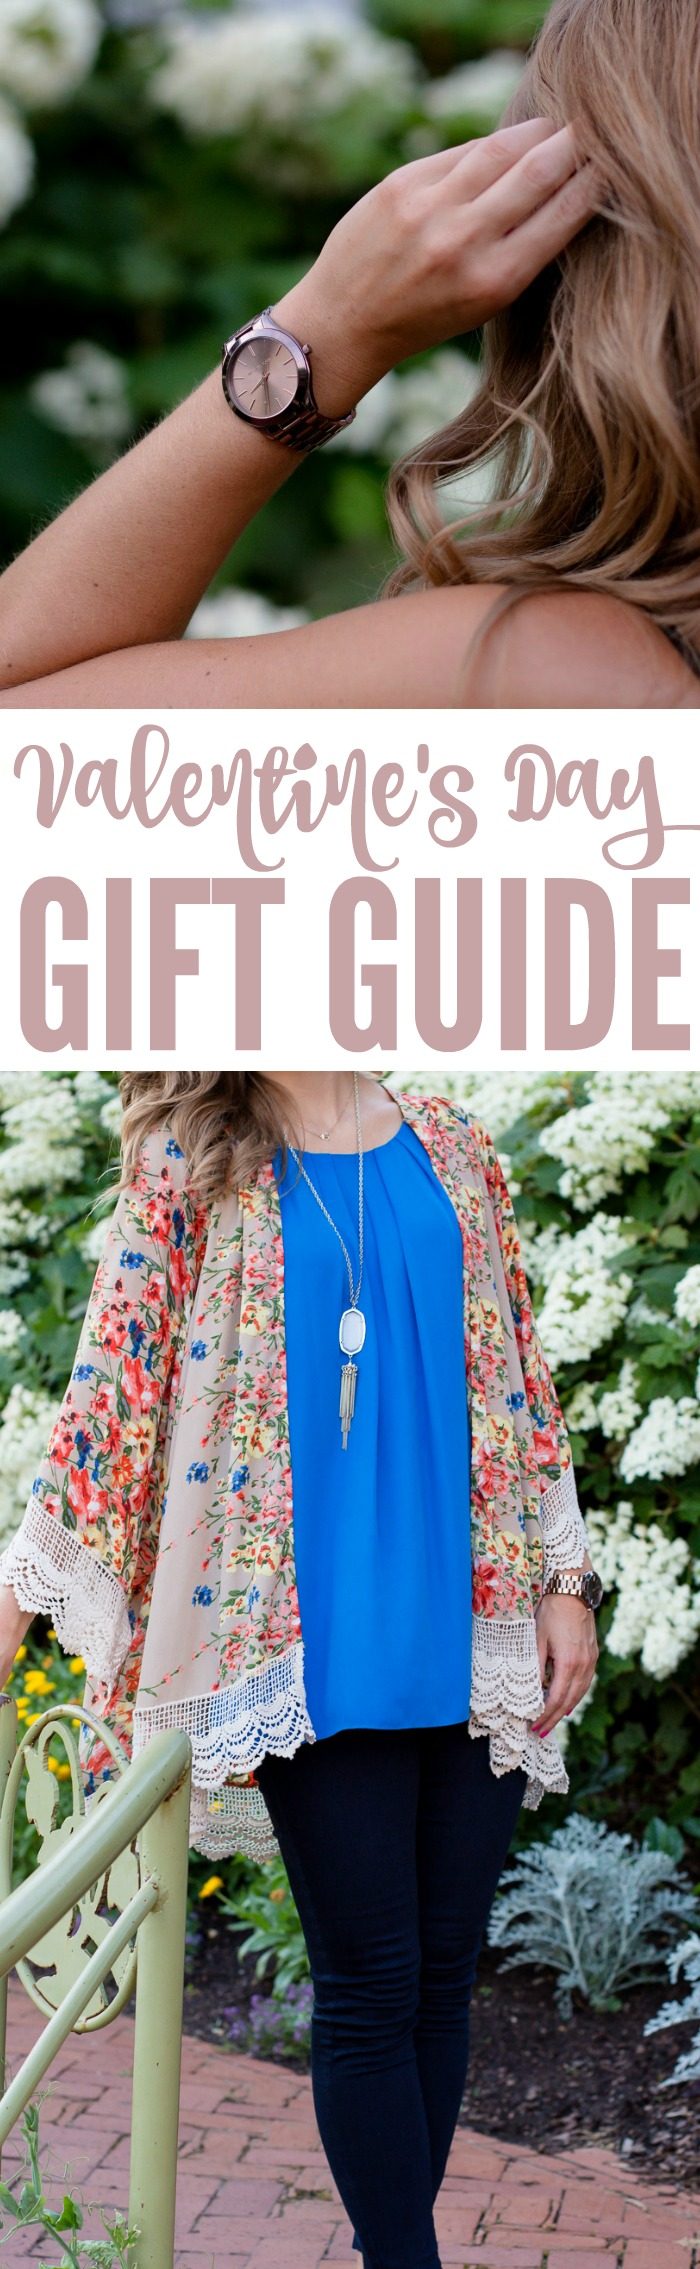 Valentine's Day Gift Guide for Women! Gifts, Accessories, Jewelry, and all of the things you want for Valentine's Day this year!